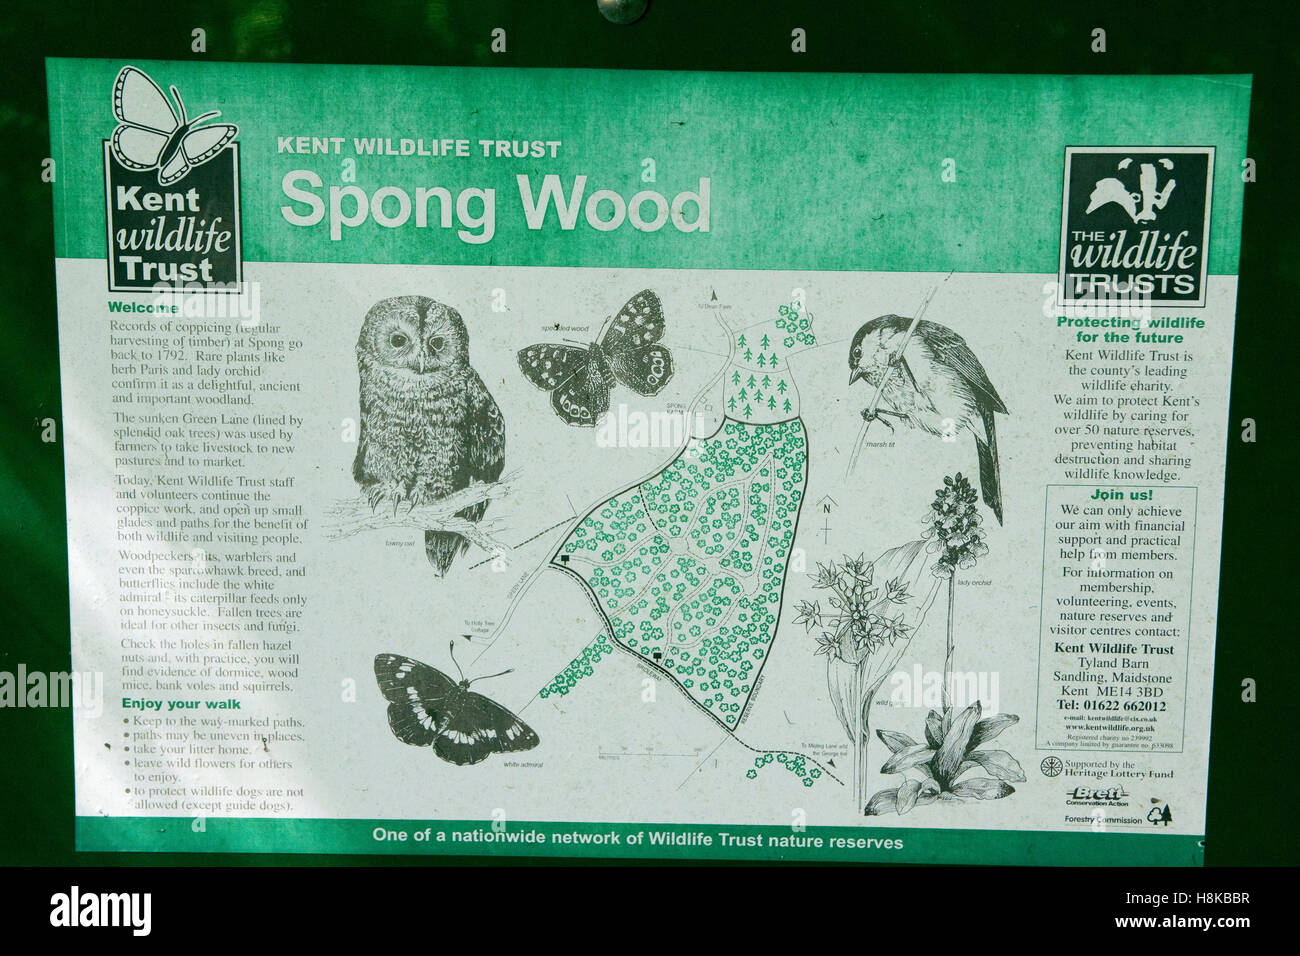 Kent Wildlife Trust Spong Wood sign near Elmstead in South East England showing the diversity of wildlife in this woodland. Stock Photo